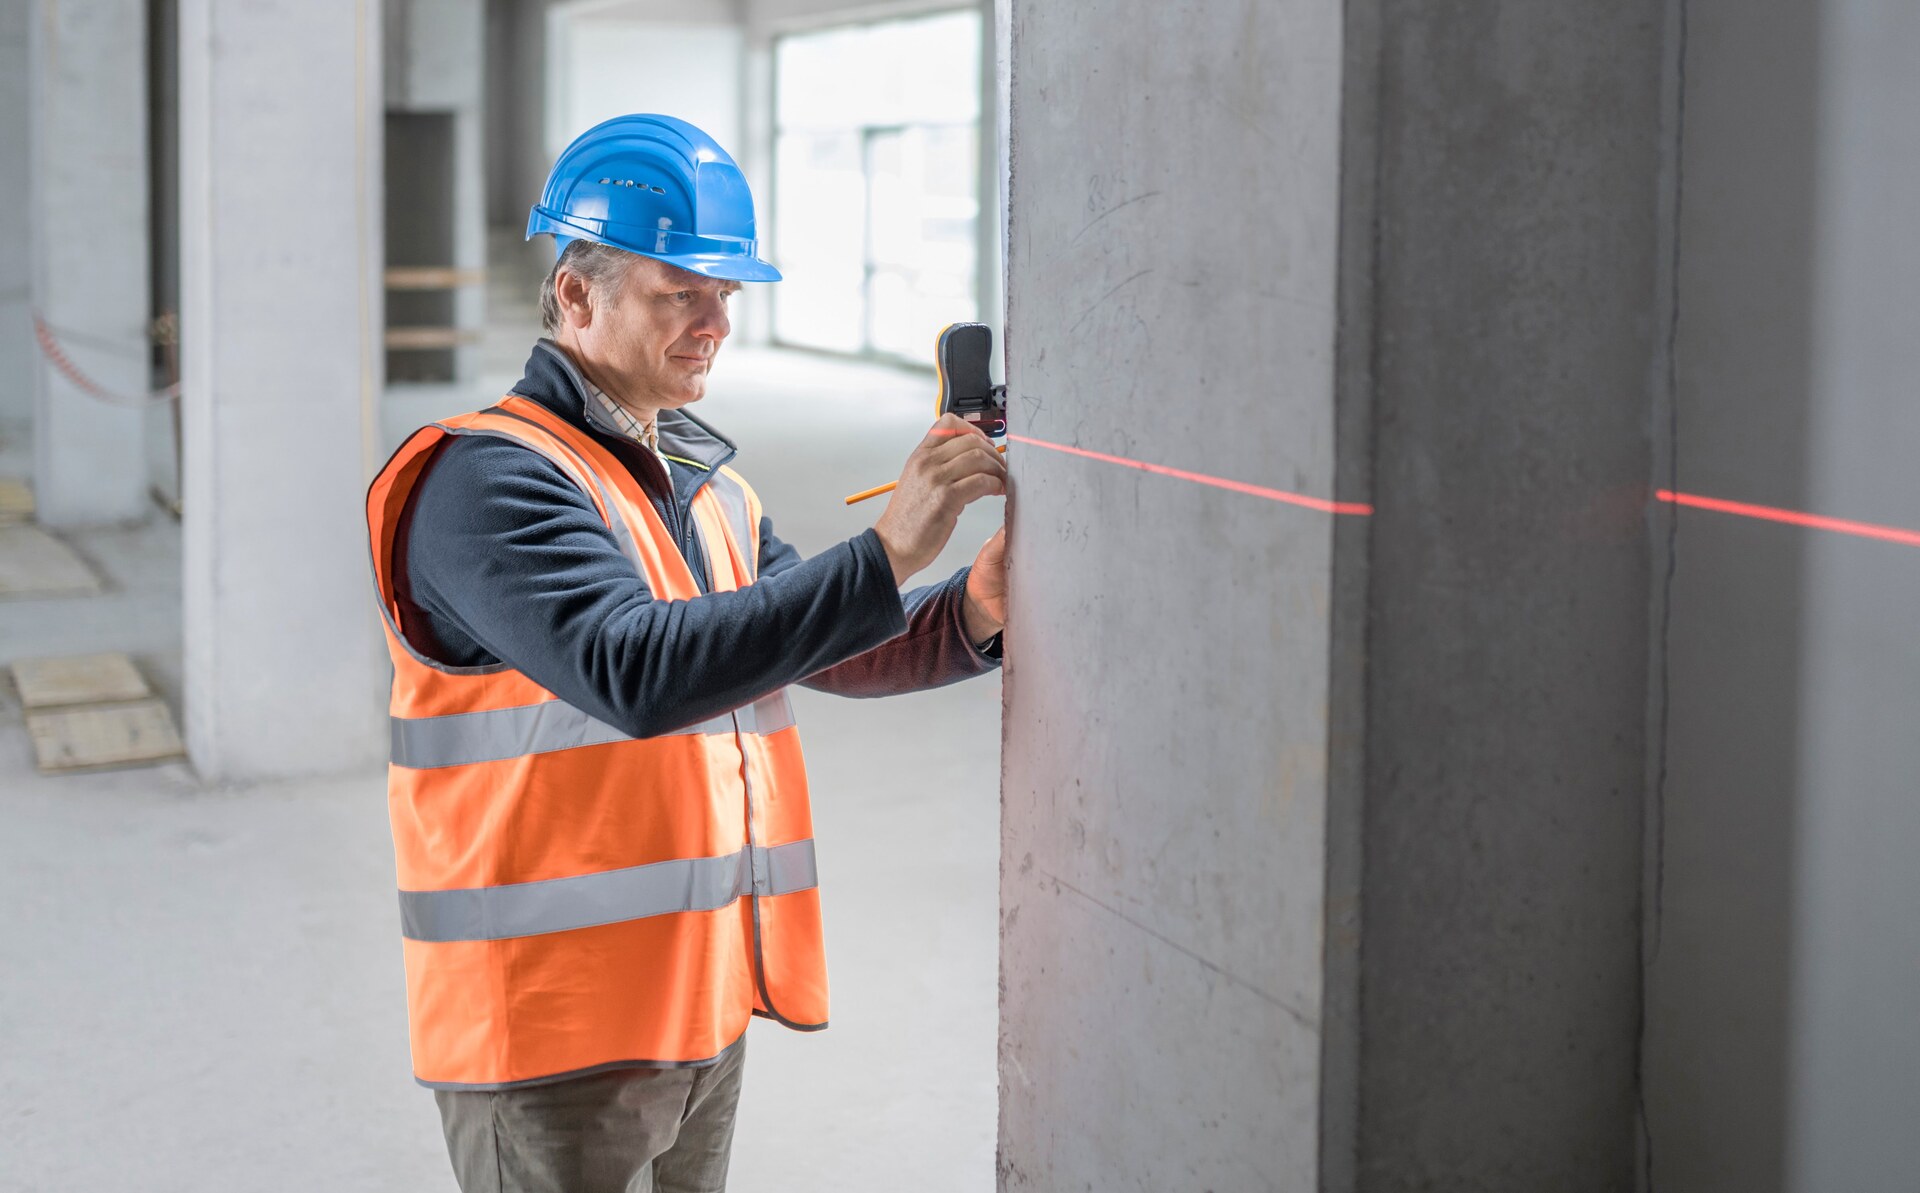 https://storables.com/wp-content/uploads/2023/09/how-to-use-a-laser-level-to-make-sure-wall-is-plumb-1693906786.jpg